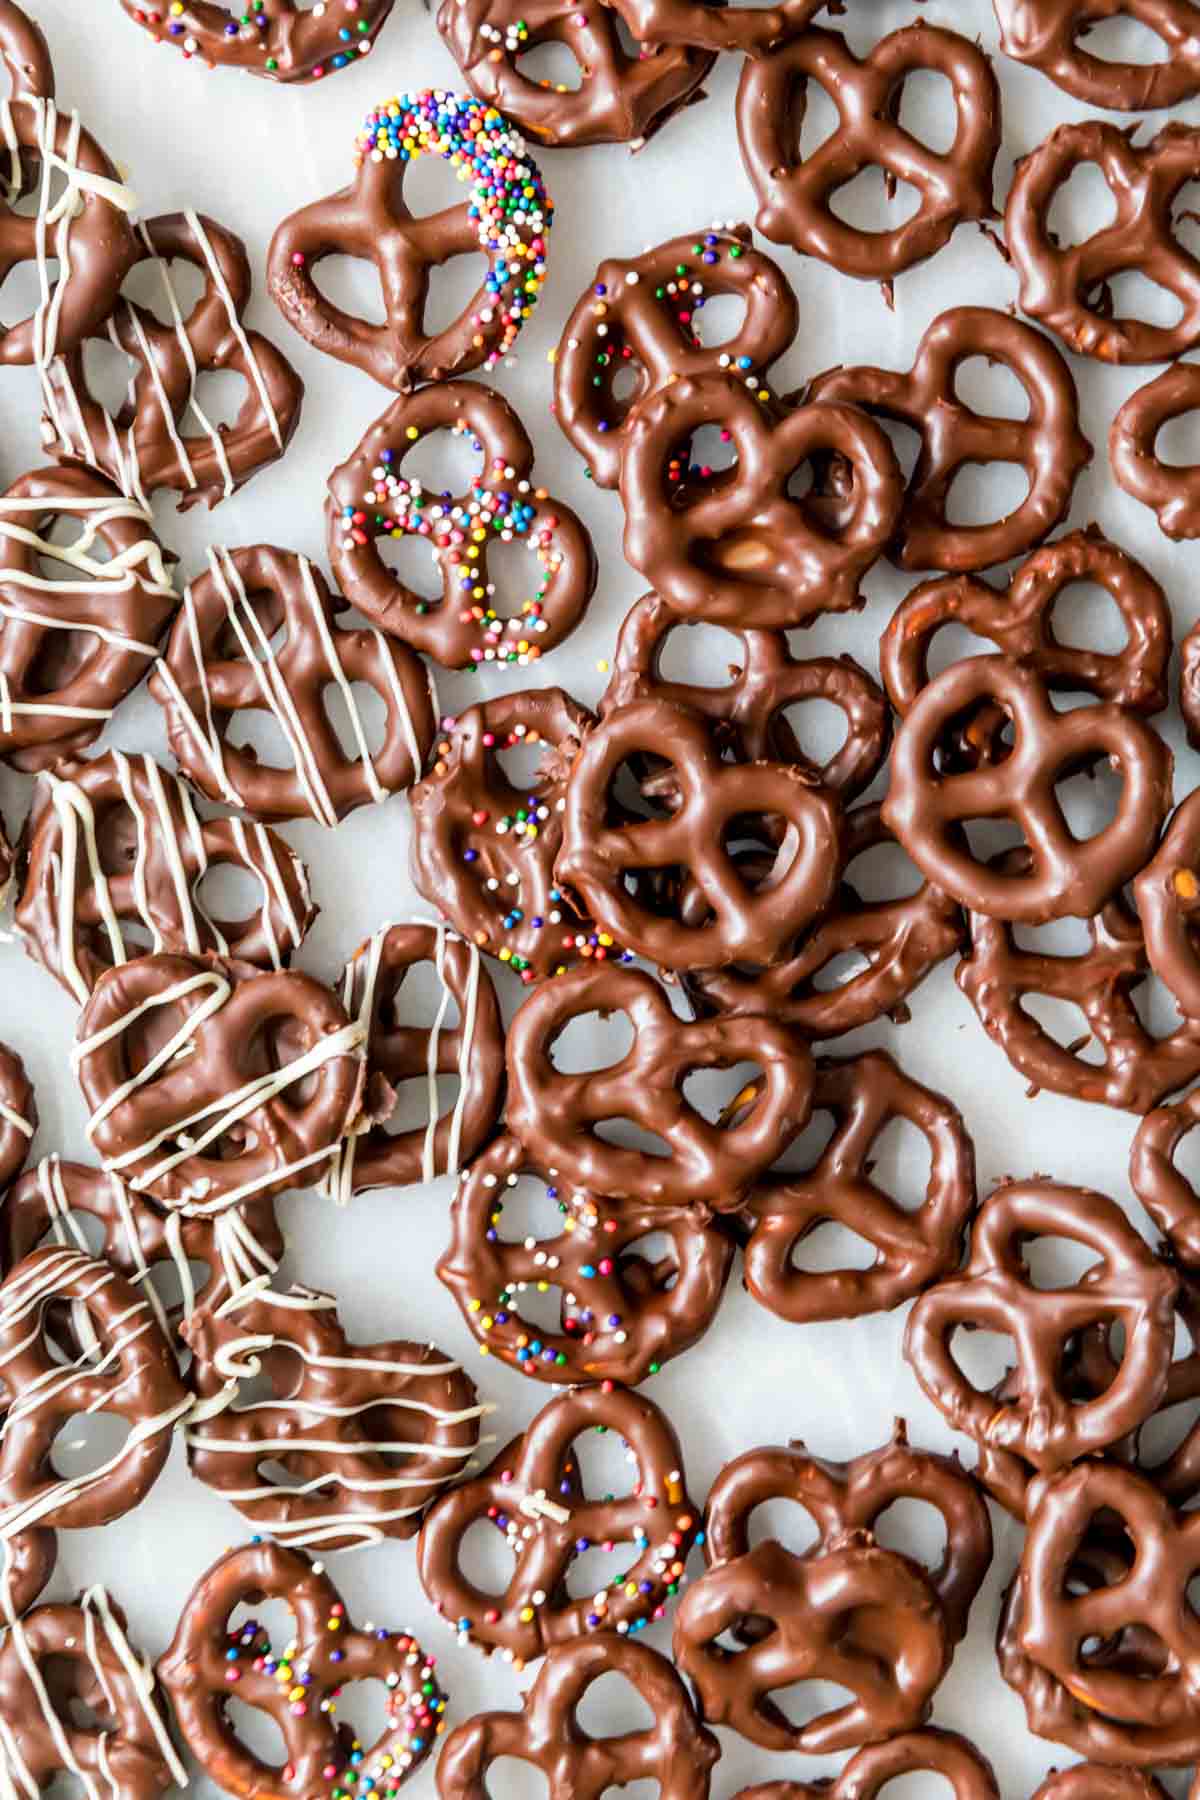 Overhead view of chocolate covered pretzels.